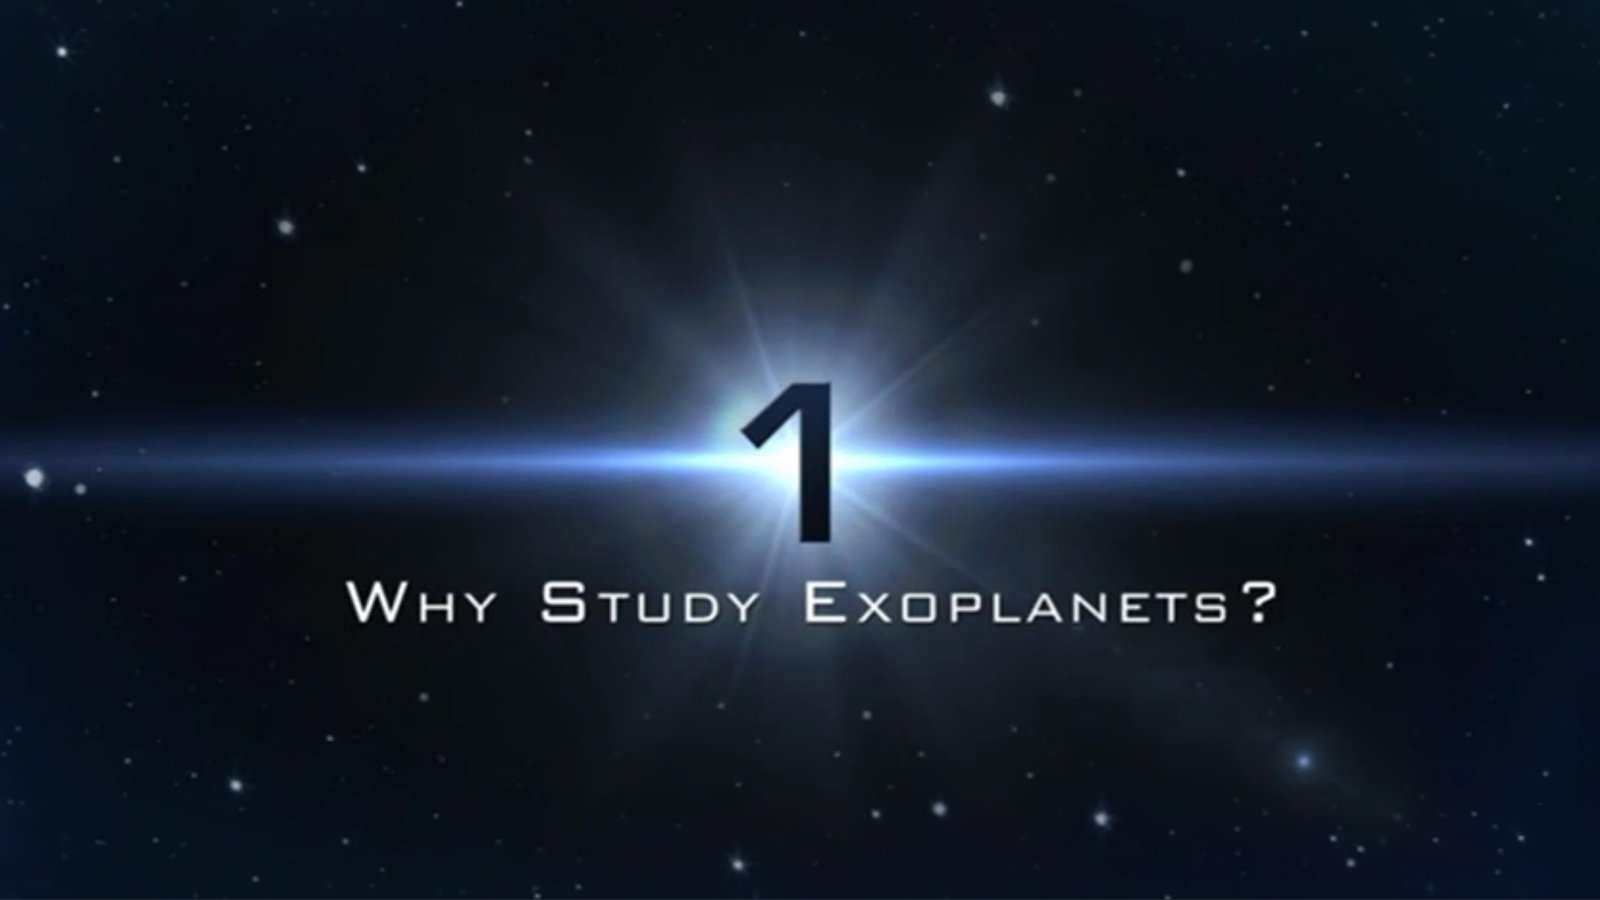 Why Study Exoplanets?